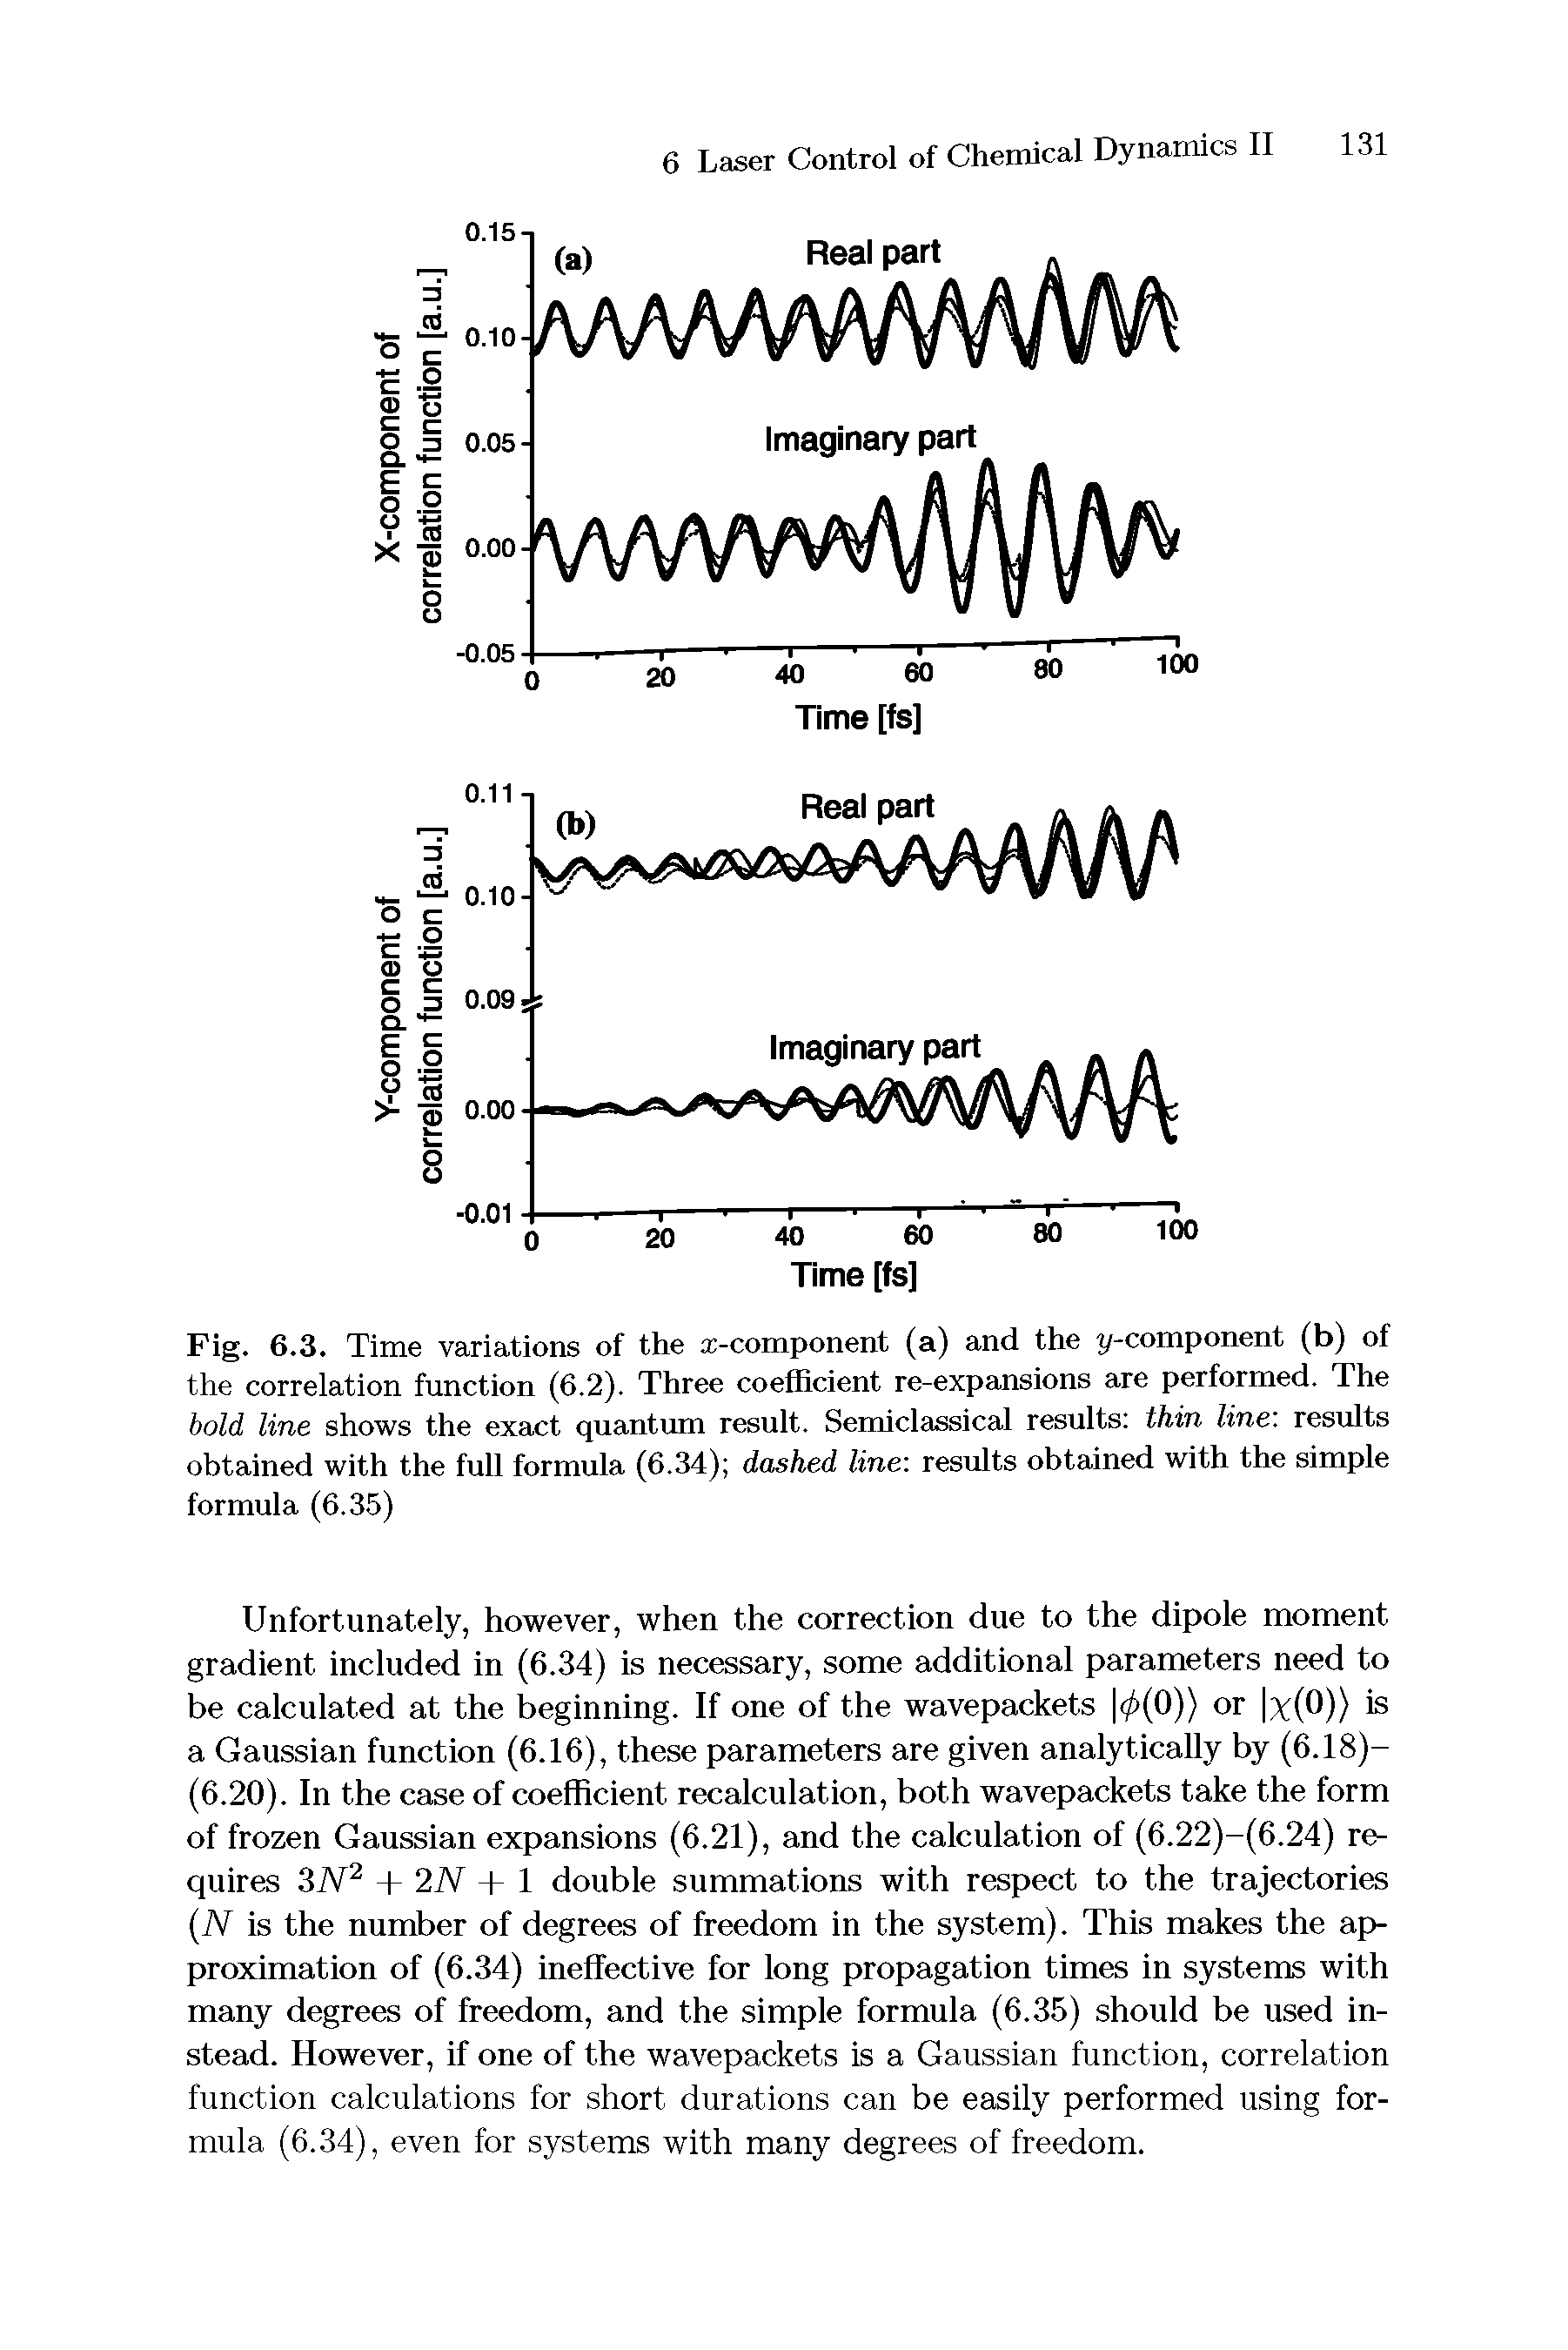 Fig. 6.3. Time variations of the x-component (a) and the y-component (b) of the correlation function (6.2). Three coefficient re-expansions are performed. The bold line shows the exact quantum result. Semiclassical results thin line results obtained with the full formula (6.34) dashed line results obtained with the simple formula (6.35)...